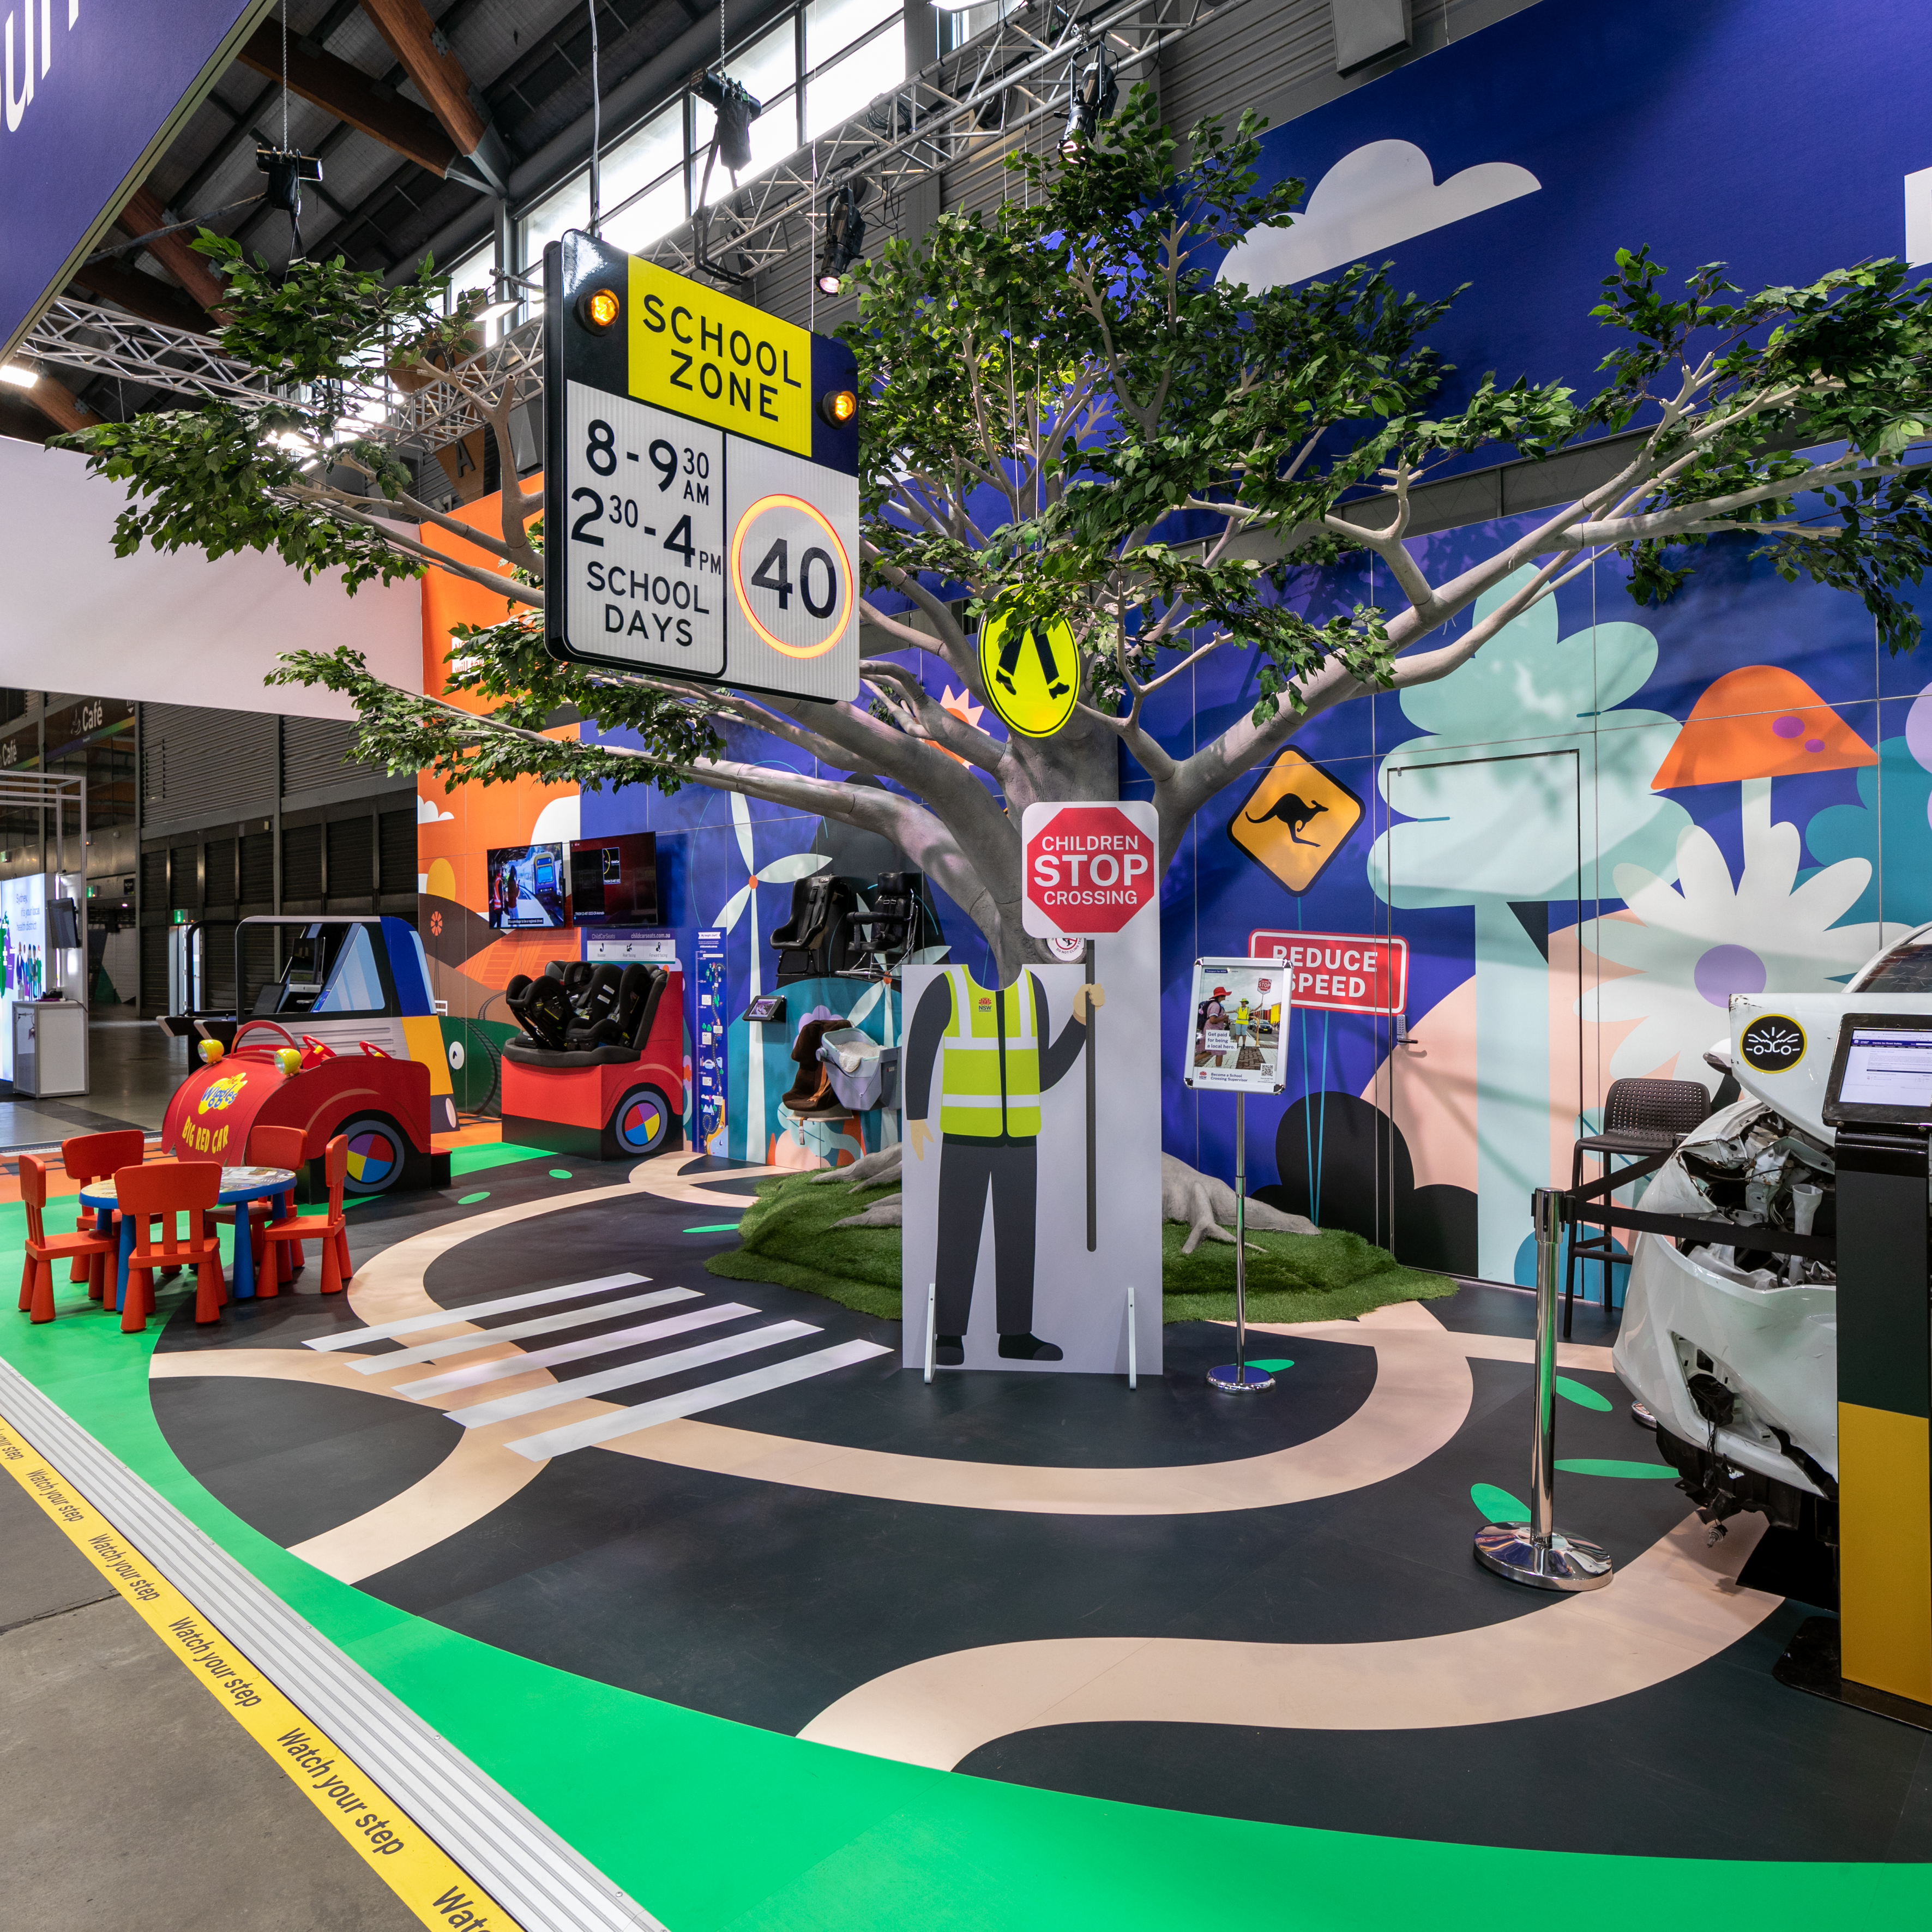 Transport For NSW Road Safety Custom Exhibition Stand with Pedestrian Crossing and School Zone at Sydney Royal Easter Show.